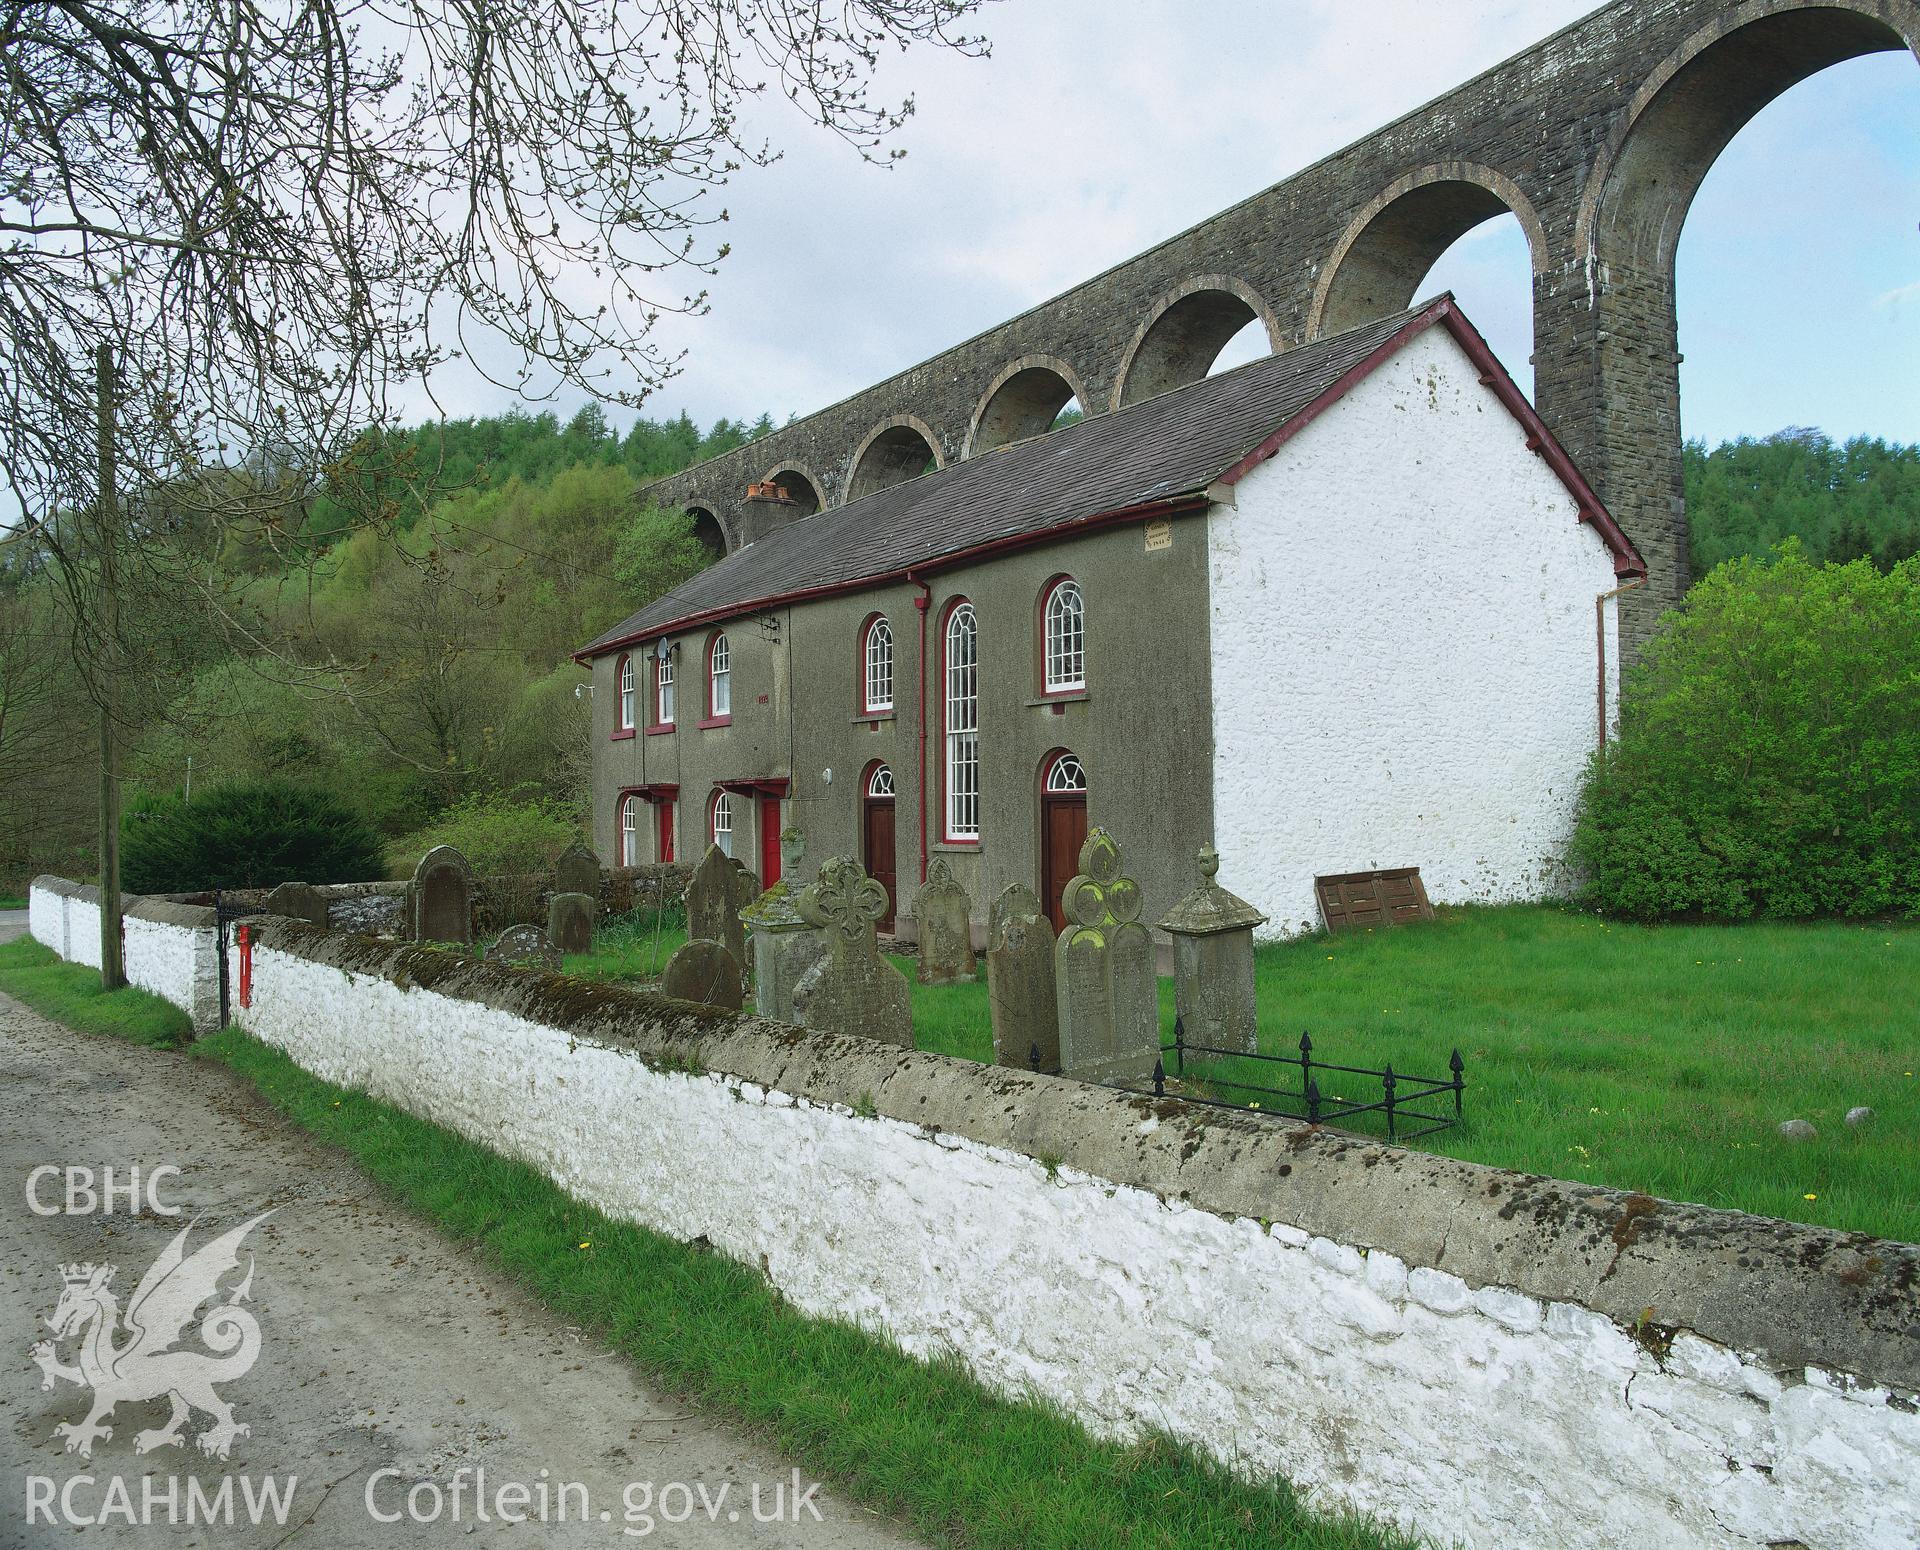 RCAHMW colour transparency showing view of Gosen Chapel, with Cynghordy Viaduct in the background.